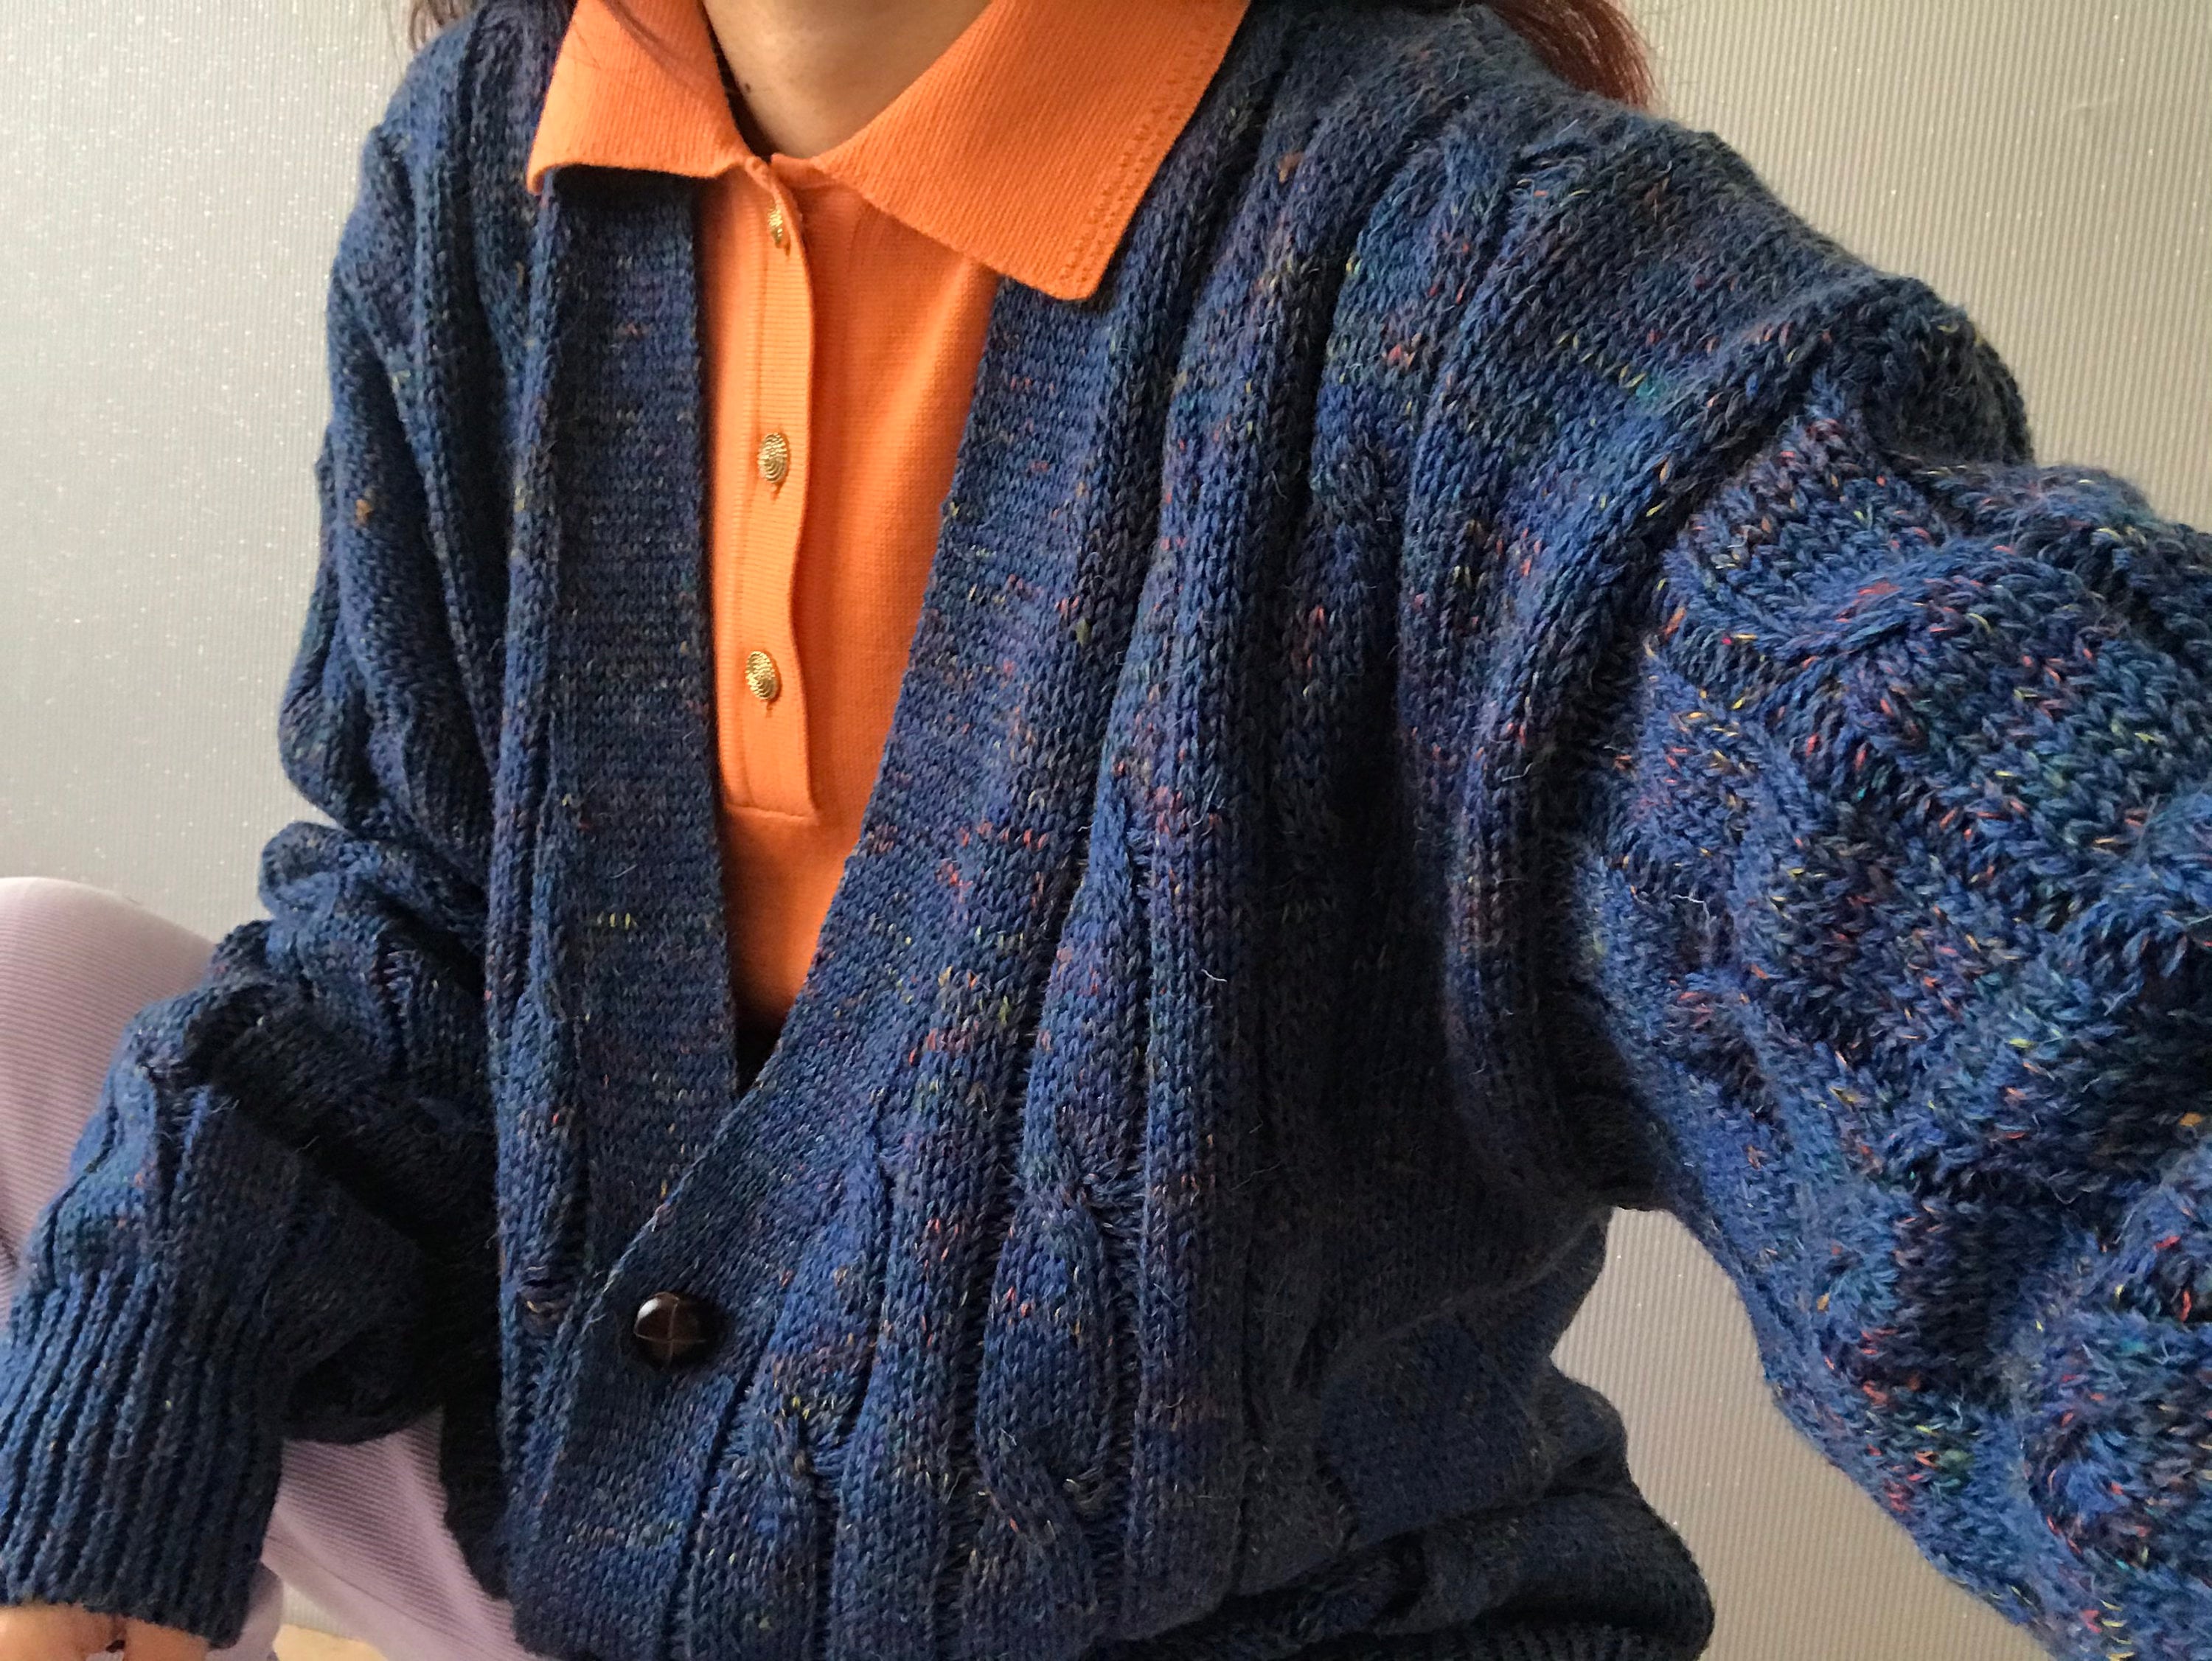 Vintage Unisex Blue Marbled Wool Blend Cable Knit Cardigan/ Top/ Sweater/ Pullover/ Tall S - Xl